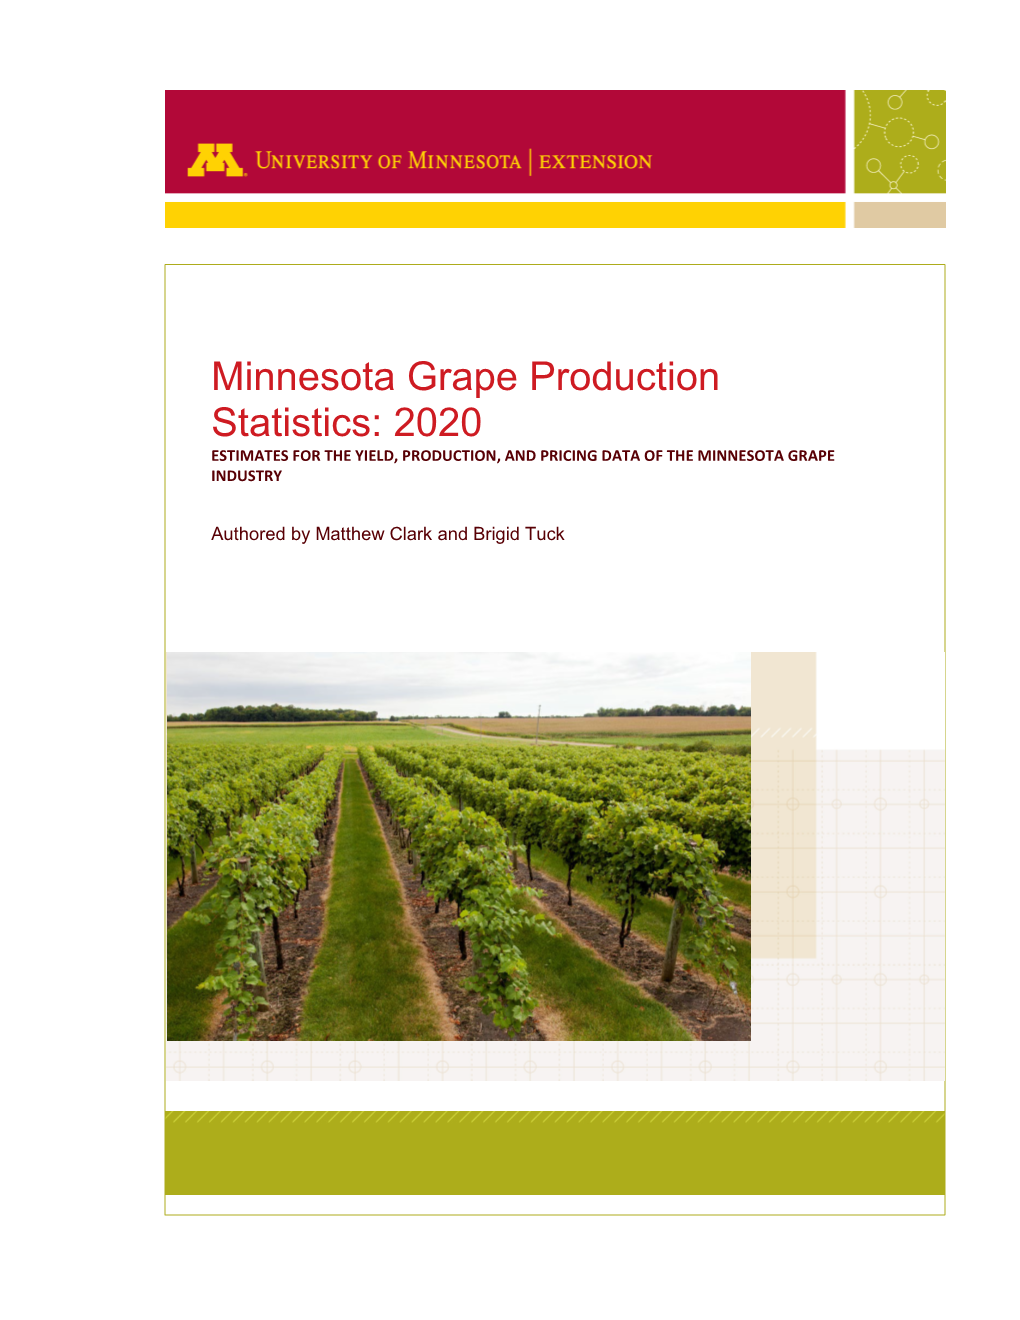 Minnesota Grape Production Statistics: 2020 ESTIMATES for YIELD, PRODUCTION, and PRICING DATA of the MINNESOTA GRAPE INDUSTRY